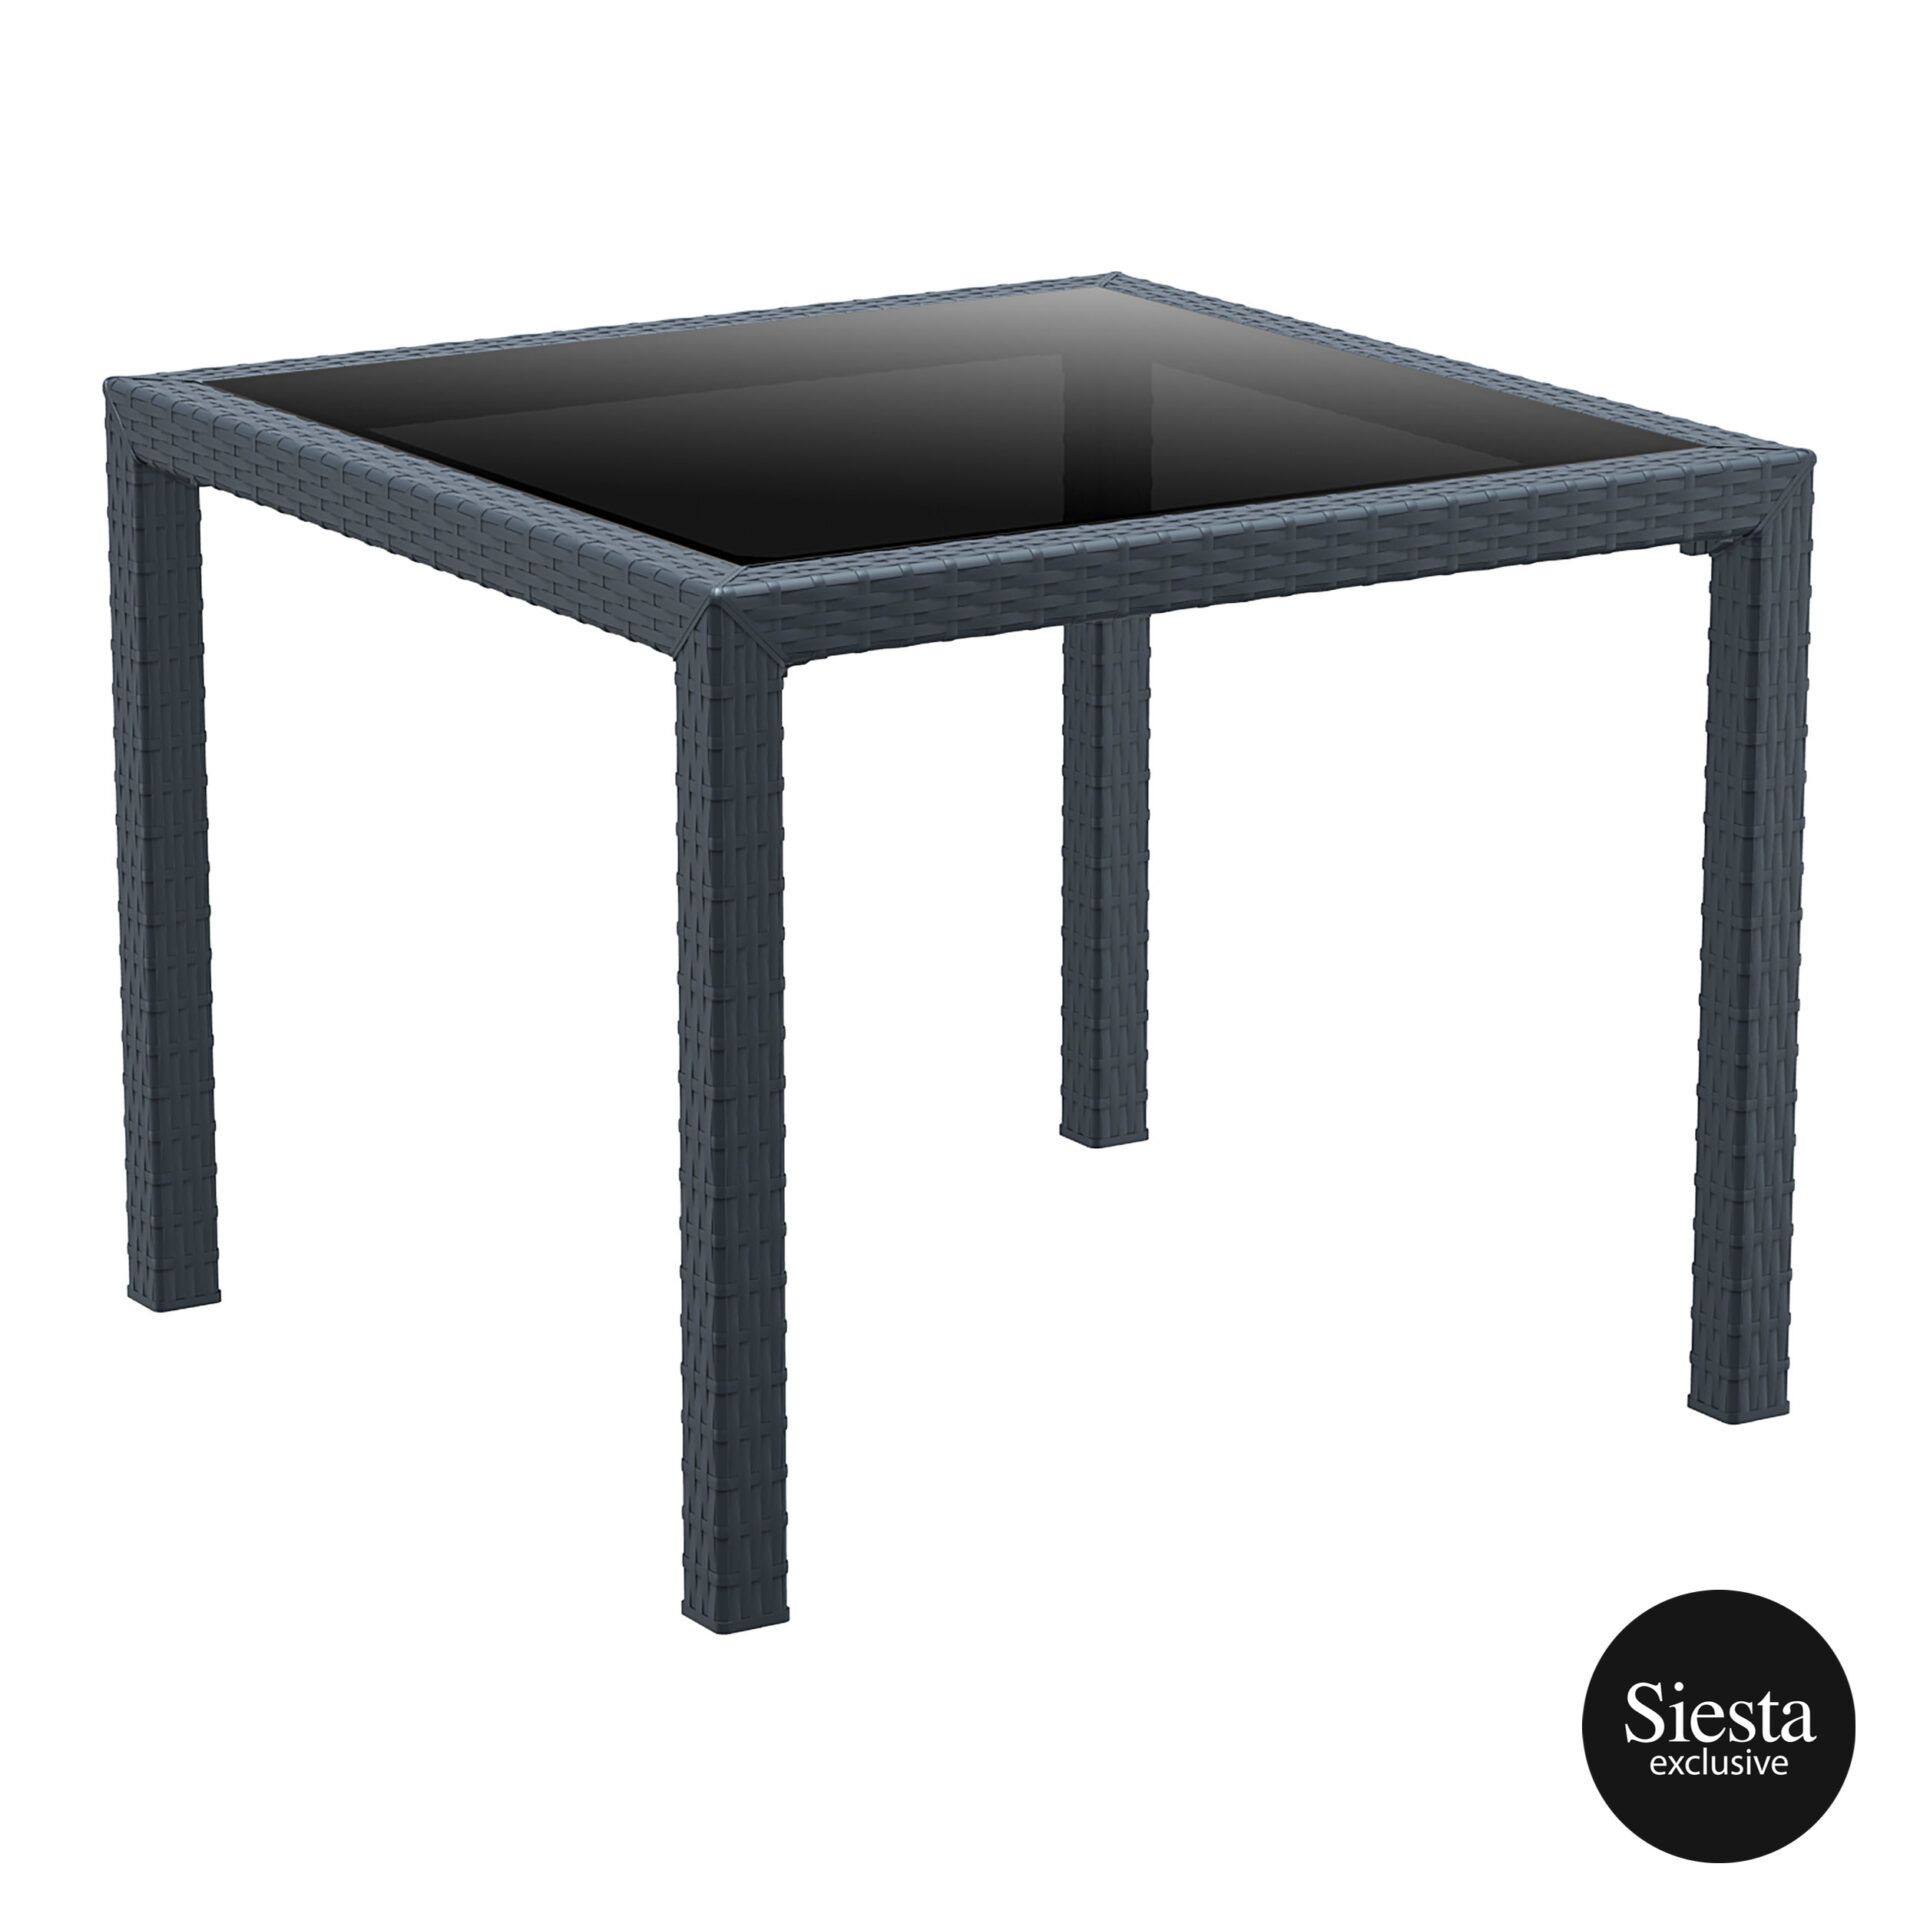 Bali Table 940 x 940 - Anthracite